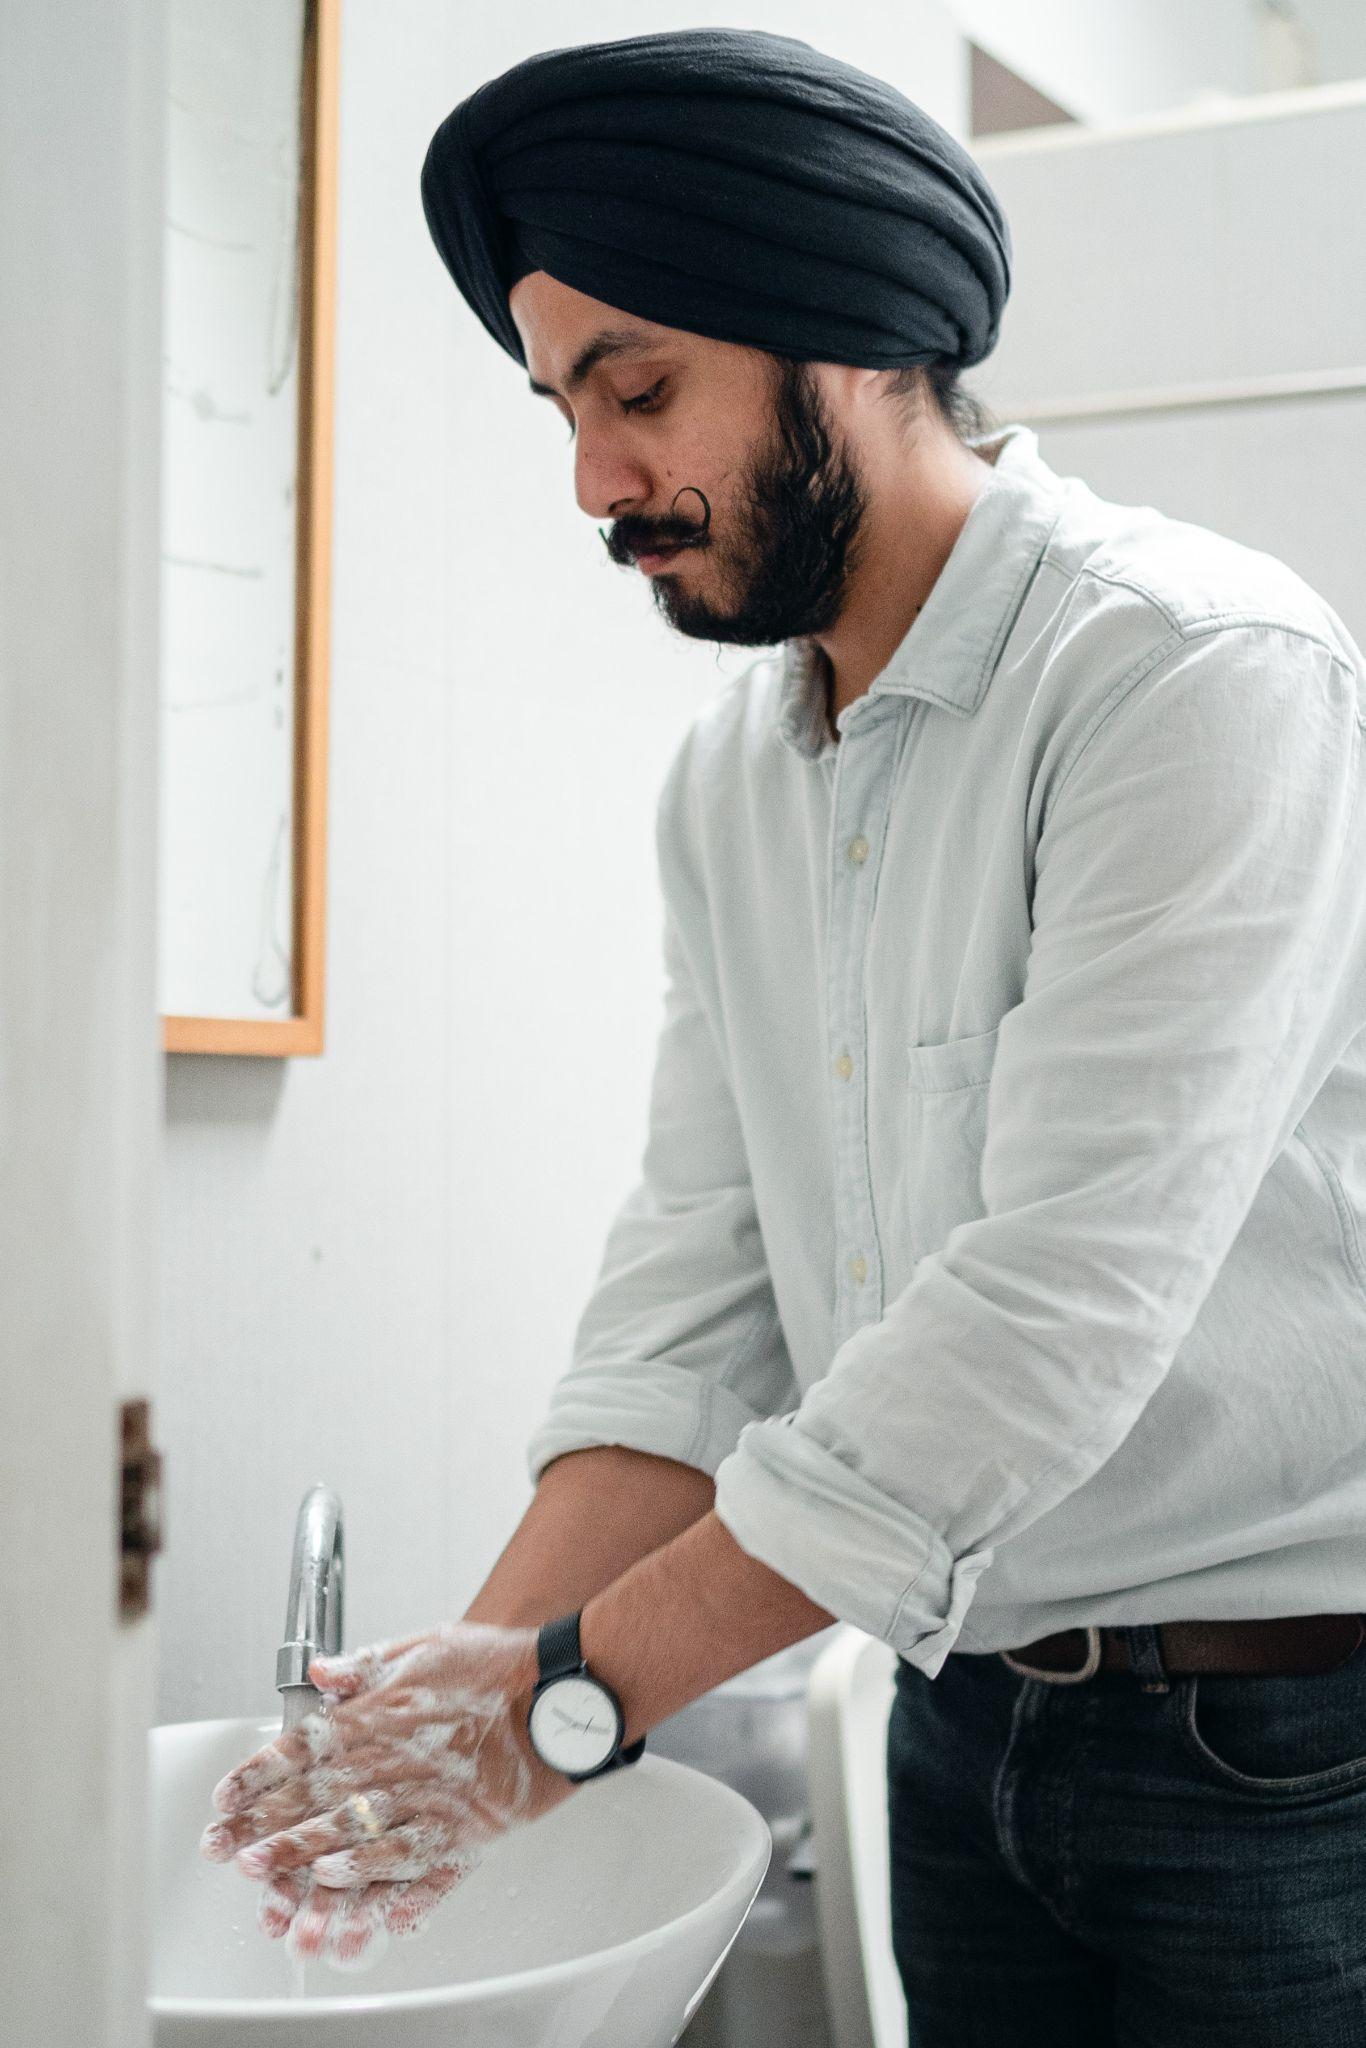 Man with a mustache, beard, and turban washing his hands at a sink.